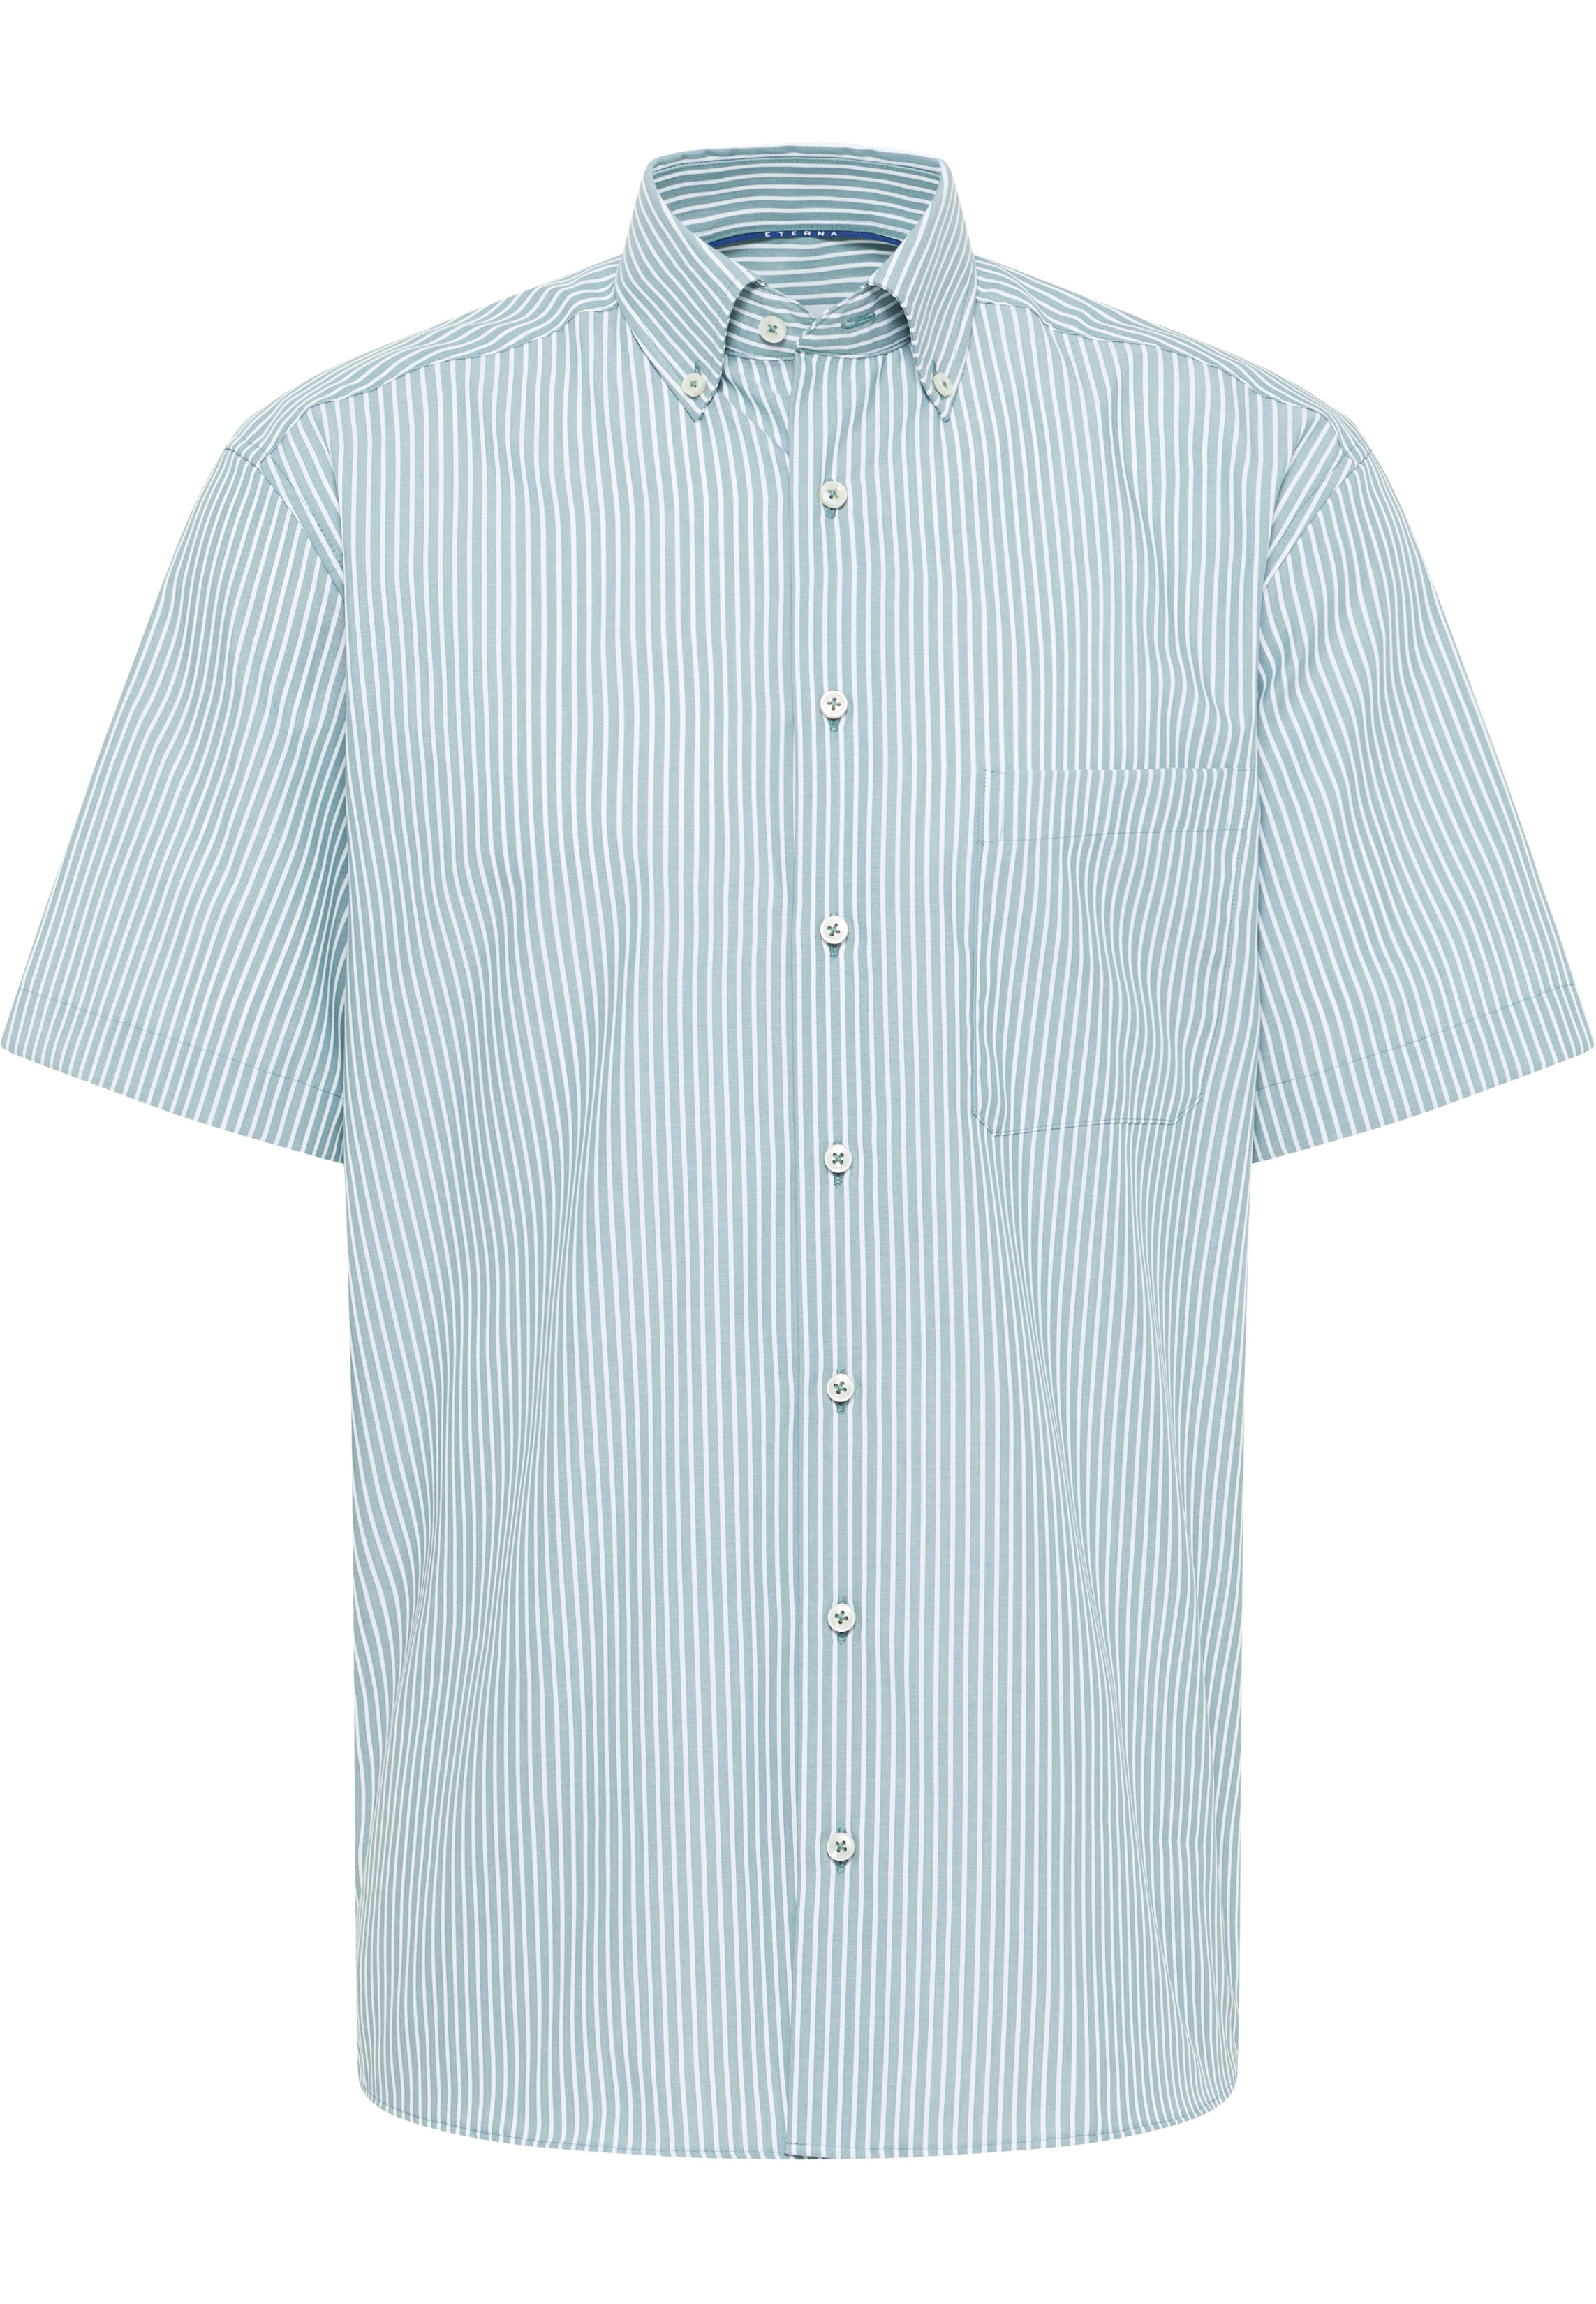 COMFORT FIT Shirt in green striped